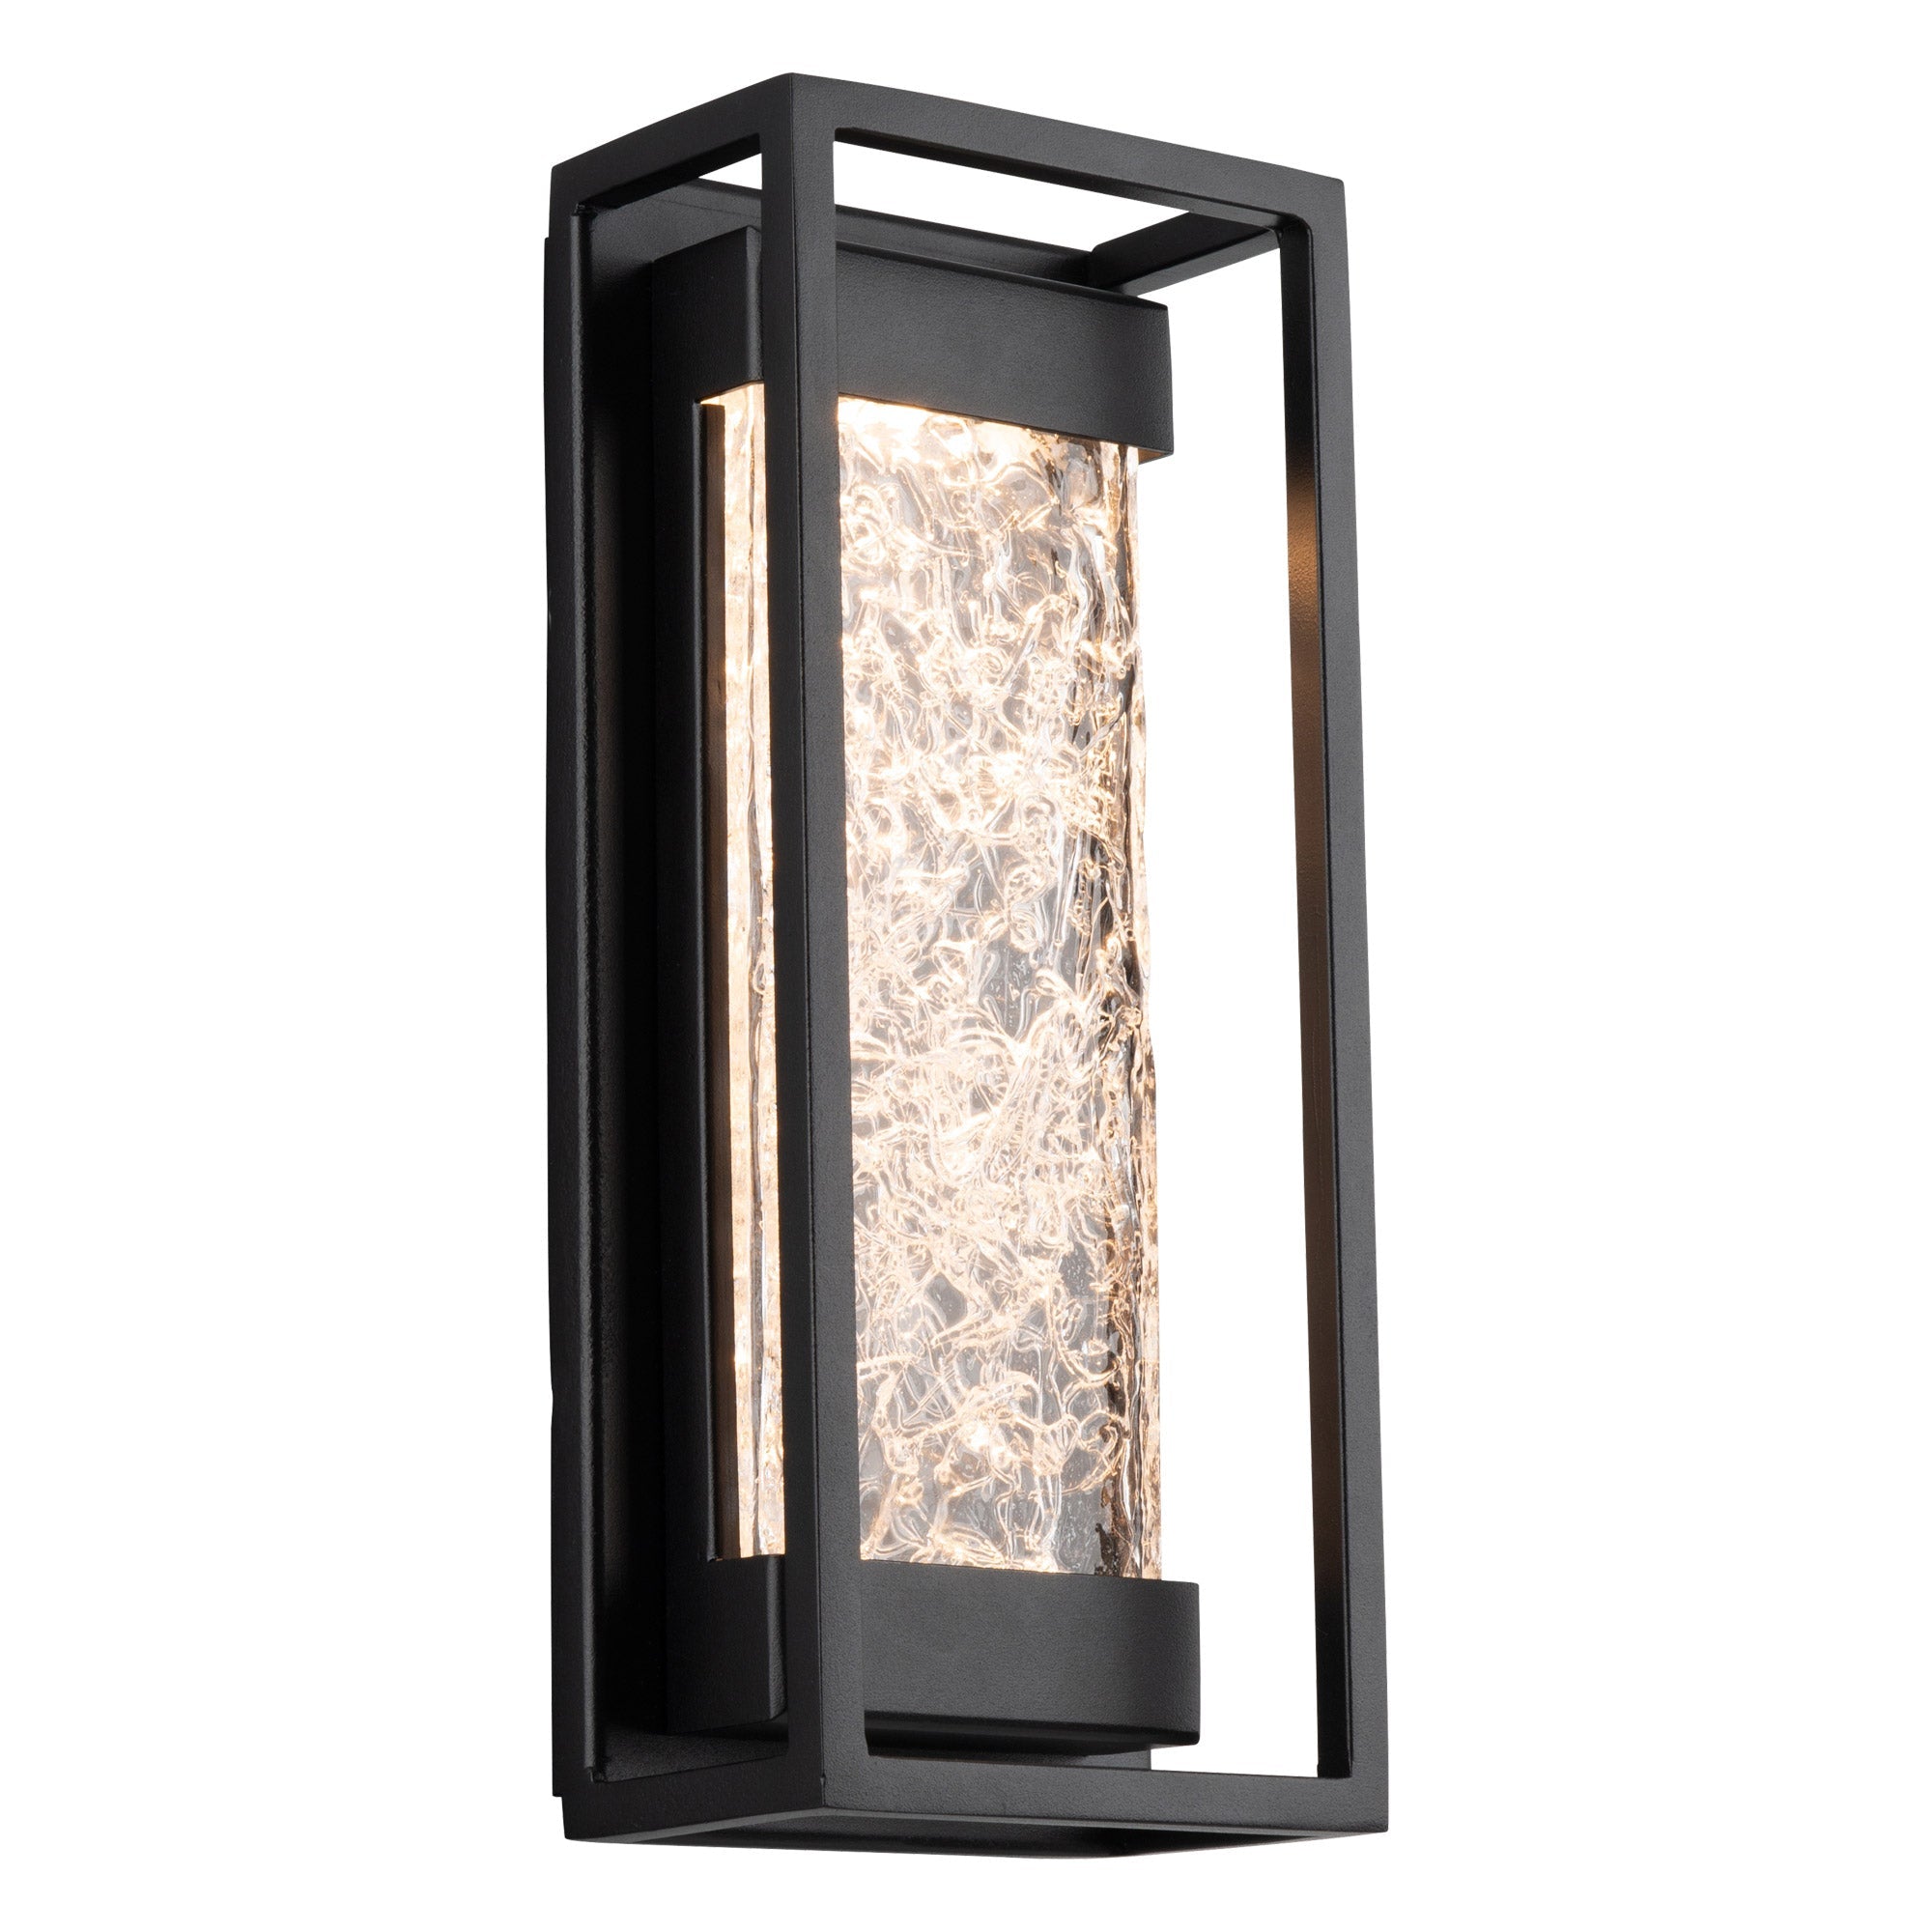 Elyse 12" LED Indoor/Outdoor Wall Light